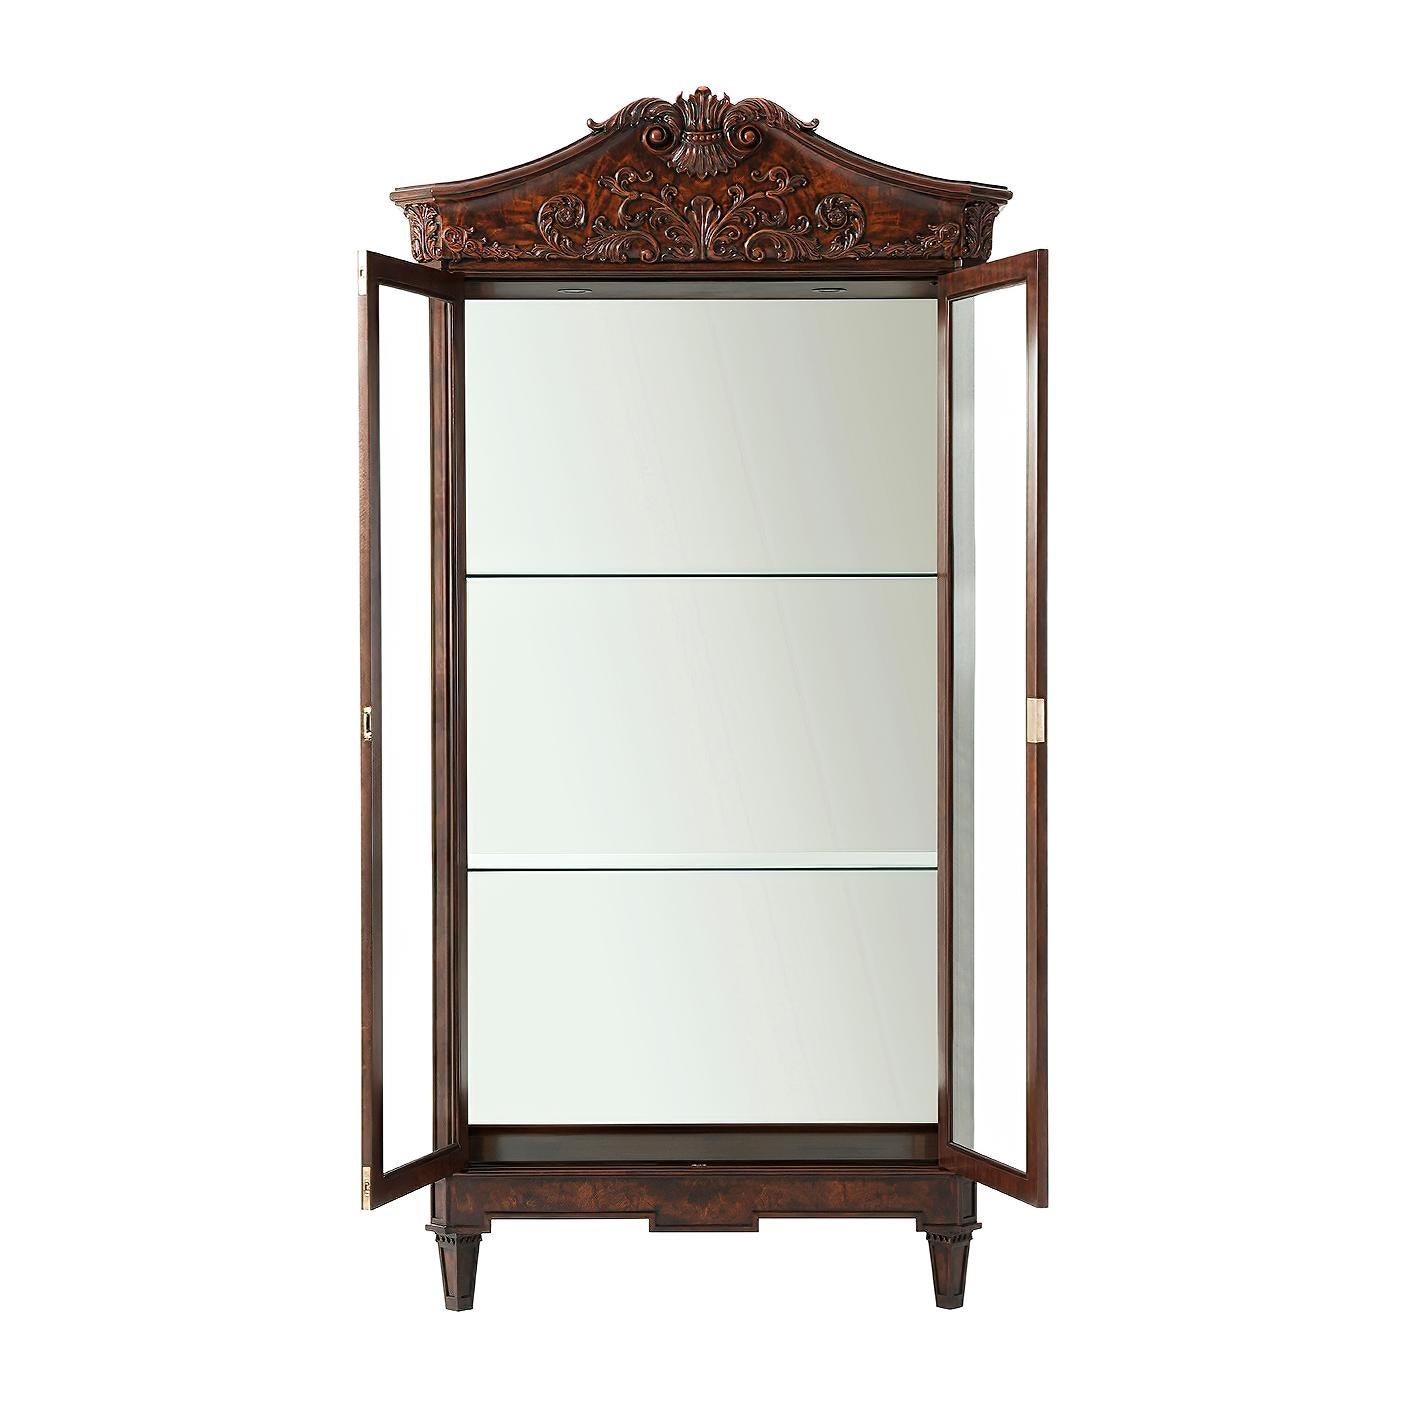 A fine George III style flame mahogany, Morado banded and Movingue display cabinet, the arched hand carved mahogany and flame mahogany veneered cornice with a shell crest, above two glazed doors and sides, enclosing a lit interior with a mirror back